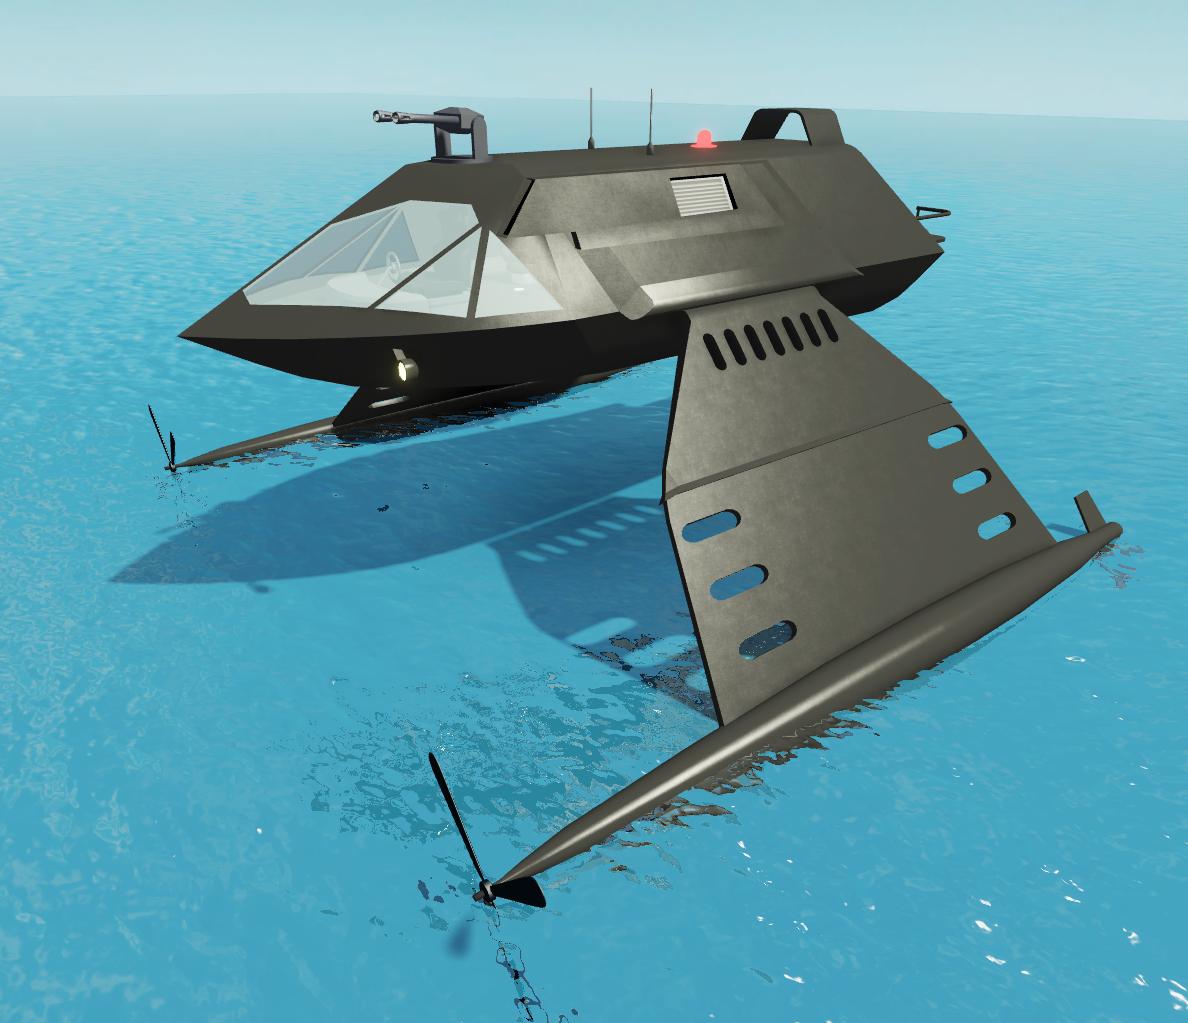 Simon On Twitter Here S A Sneak Peak Of The New Stealth Boat